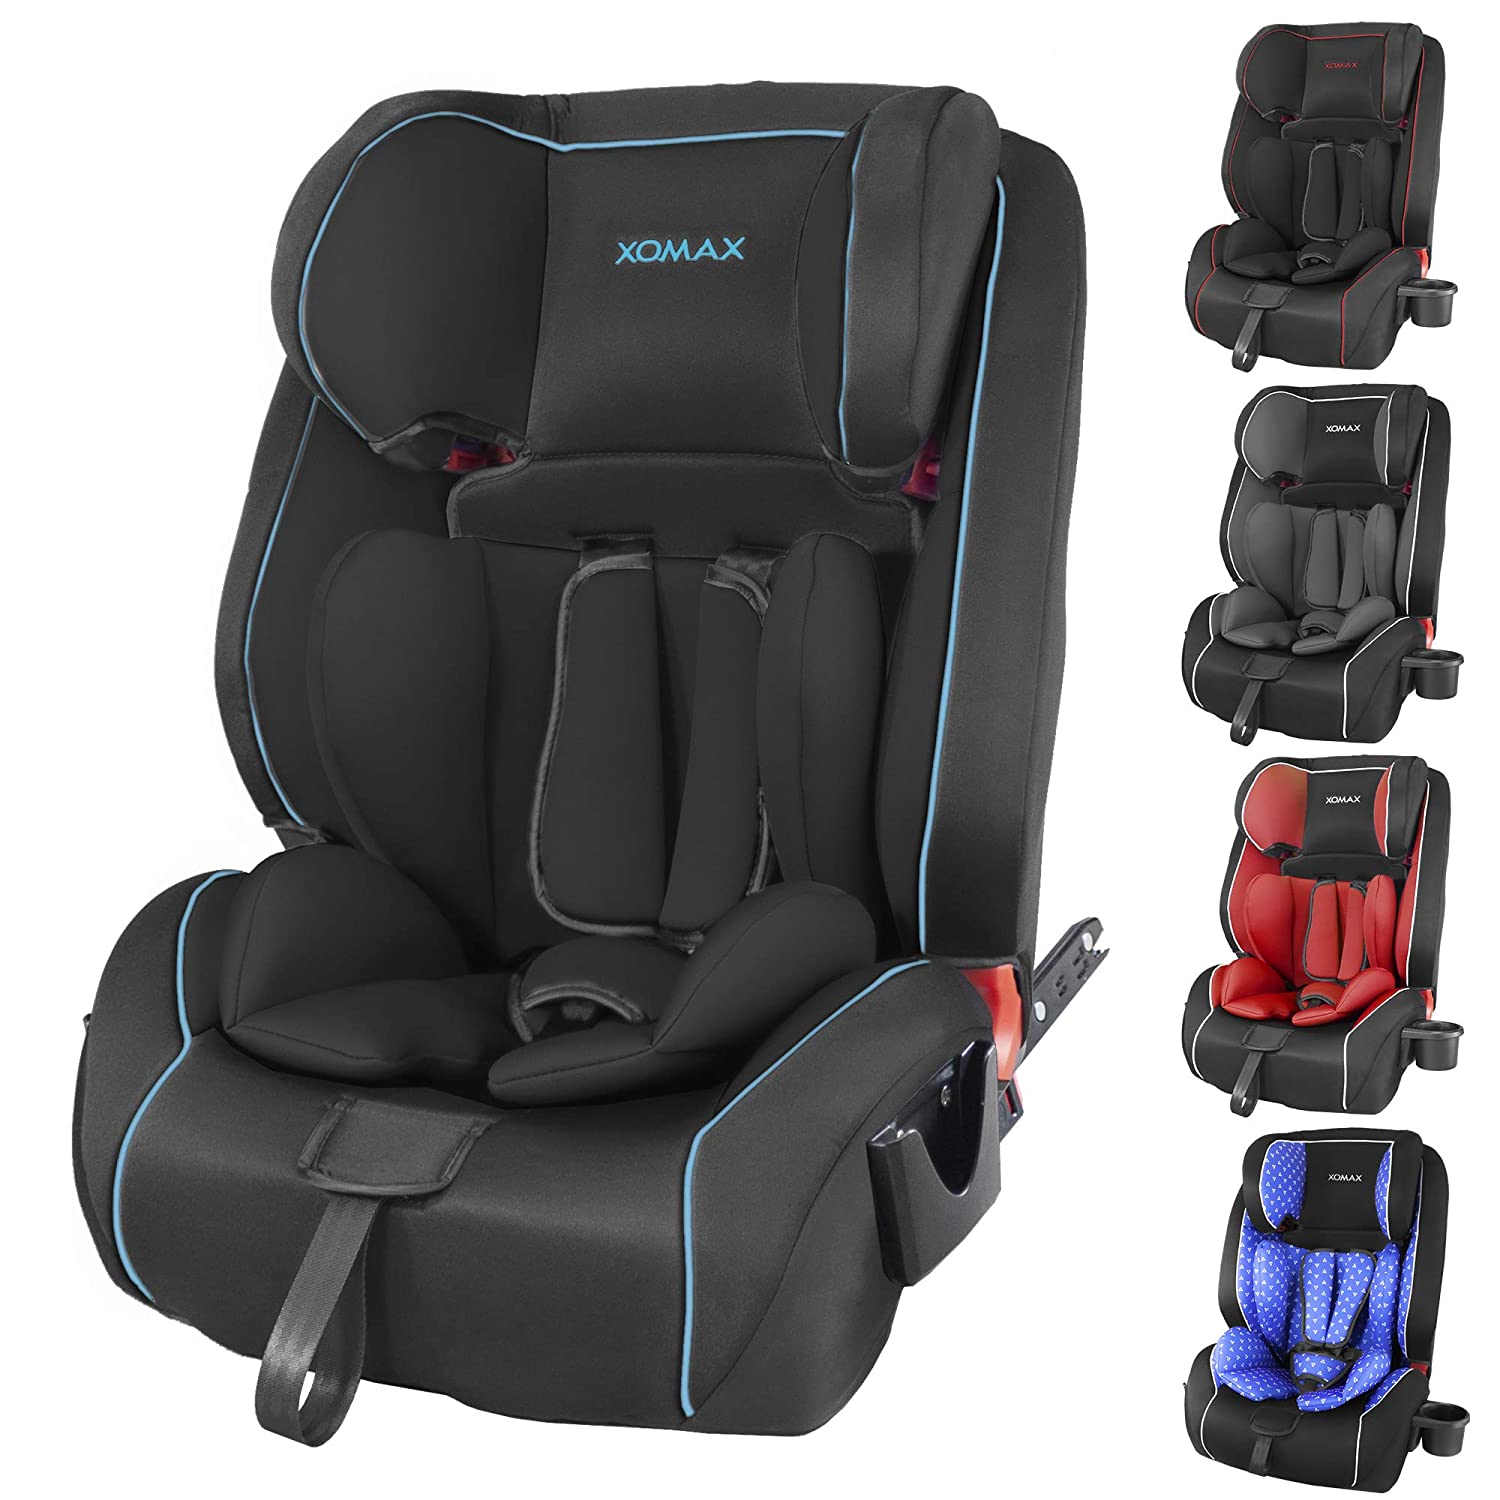 Xomax HQ668 Isofix Child Car Seat, 9 - 36 kg with Bottle Holder, Grows with Your Child: 1 - 12 Years, Group 1 / 2 / 3, 5-Point Harness and 3-Point Harness, Removable and Washable Cover, ECE R44/04 black-blue